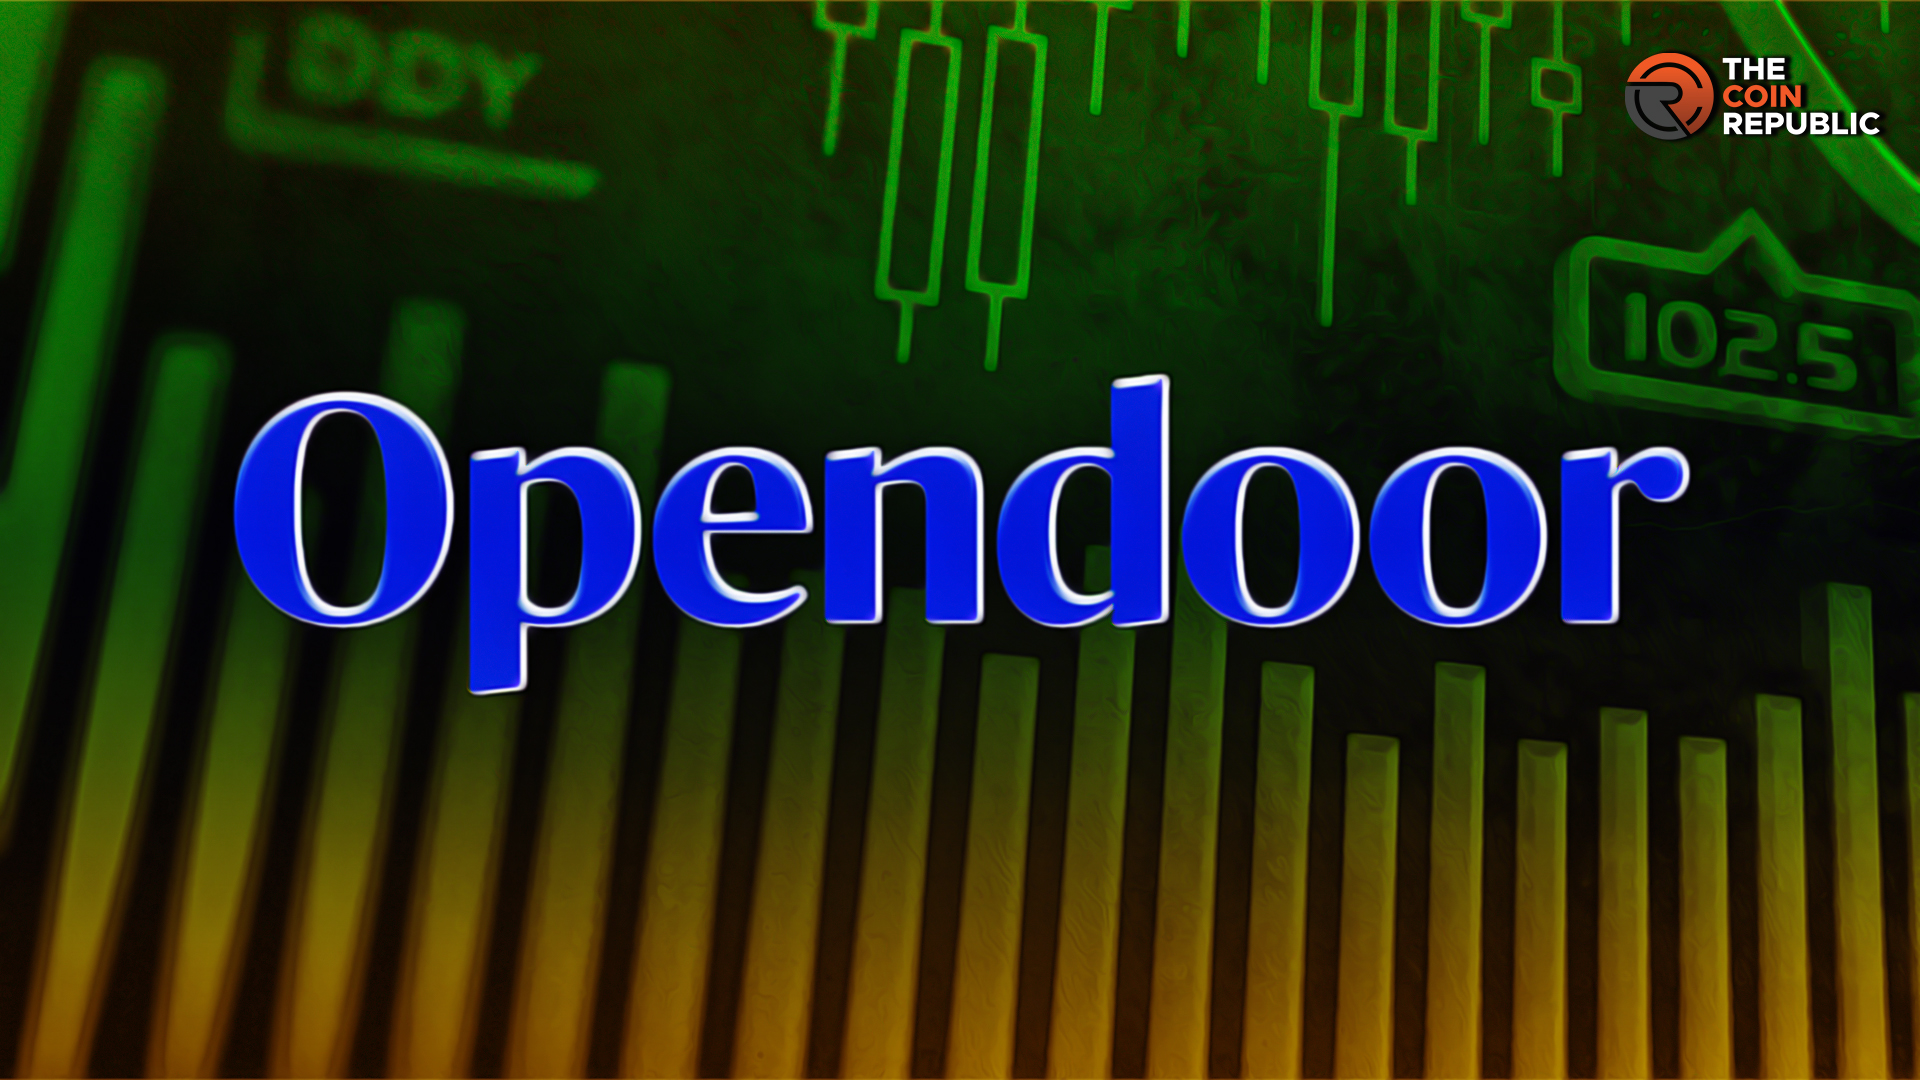 Insider Selling Continues: Can Opendoor Stock Price Slump More?